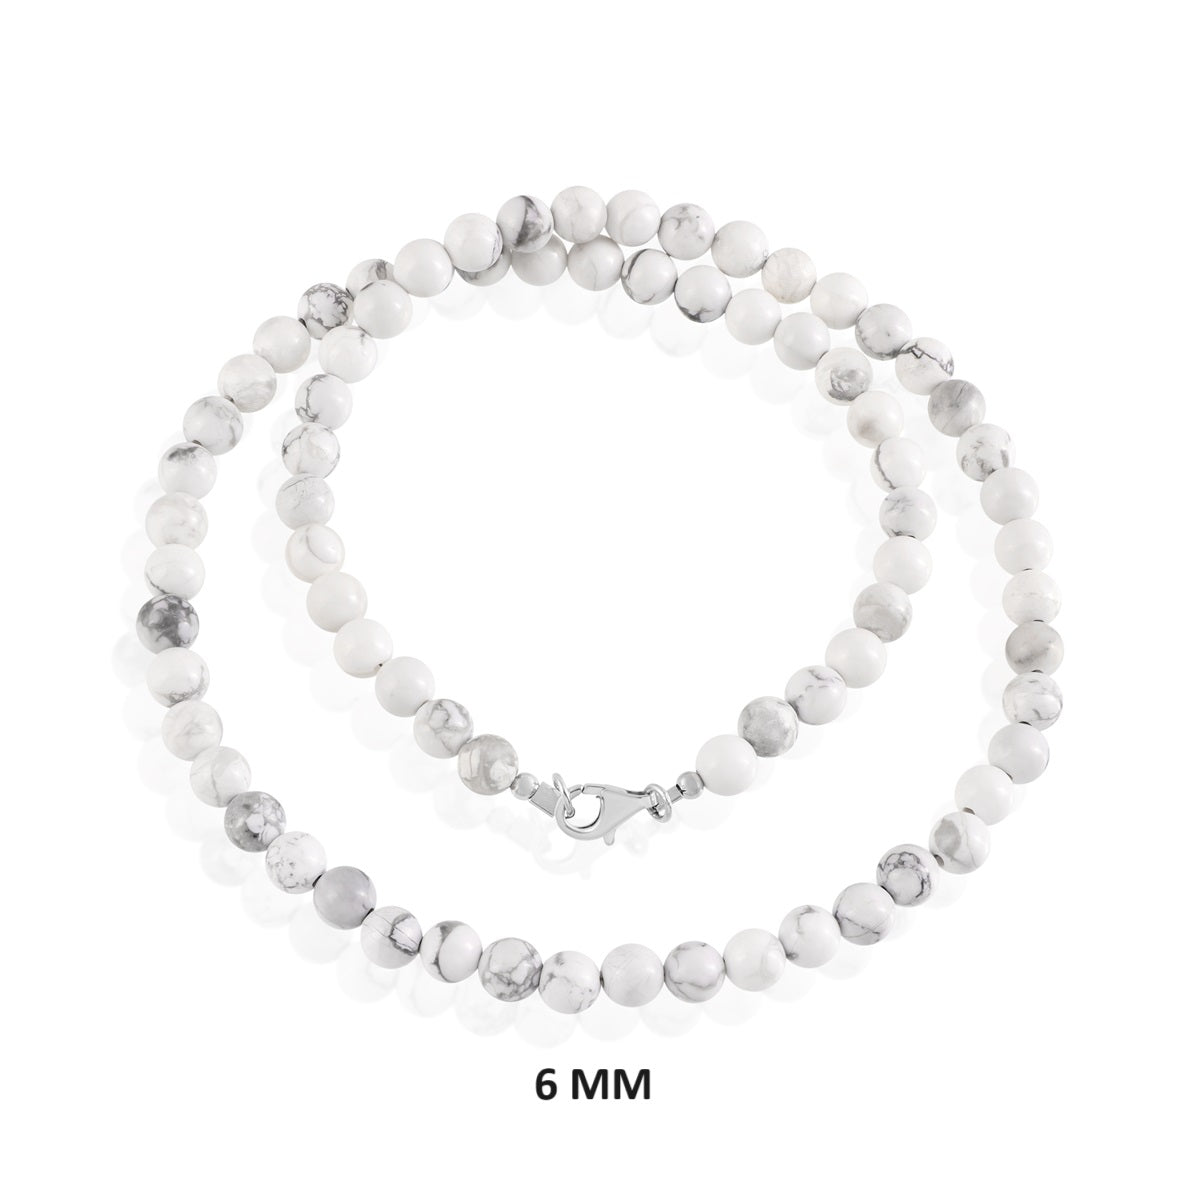 Howlite Beads Silver Necklace: Tranquility and Style Combined